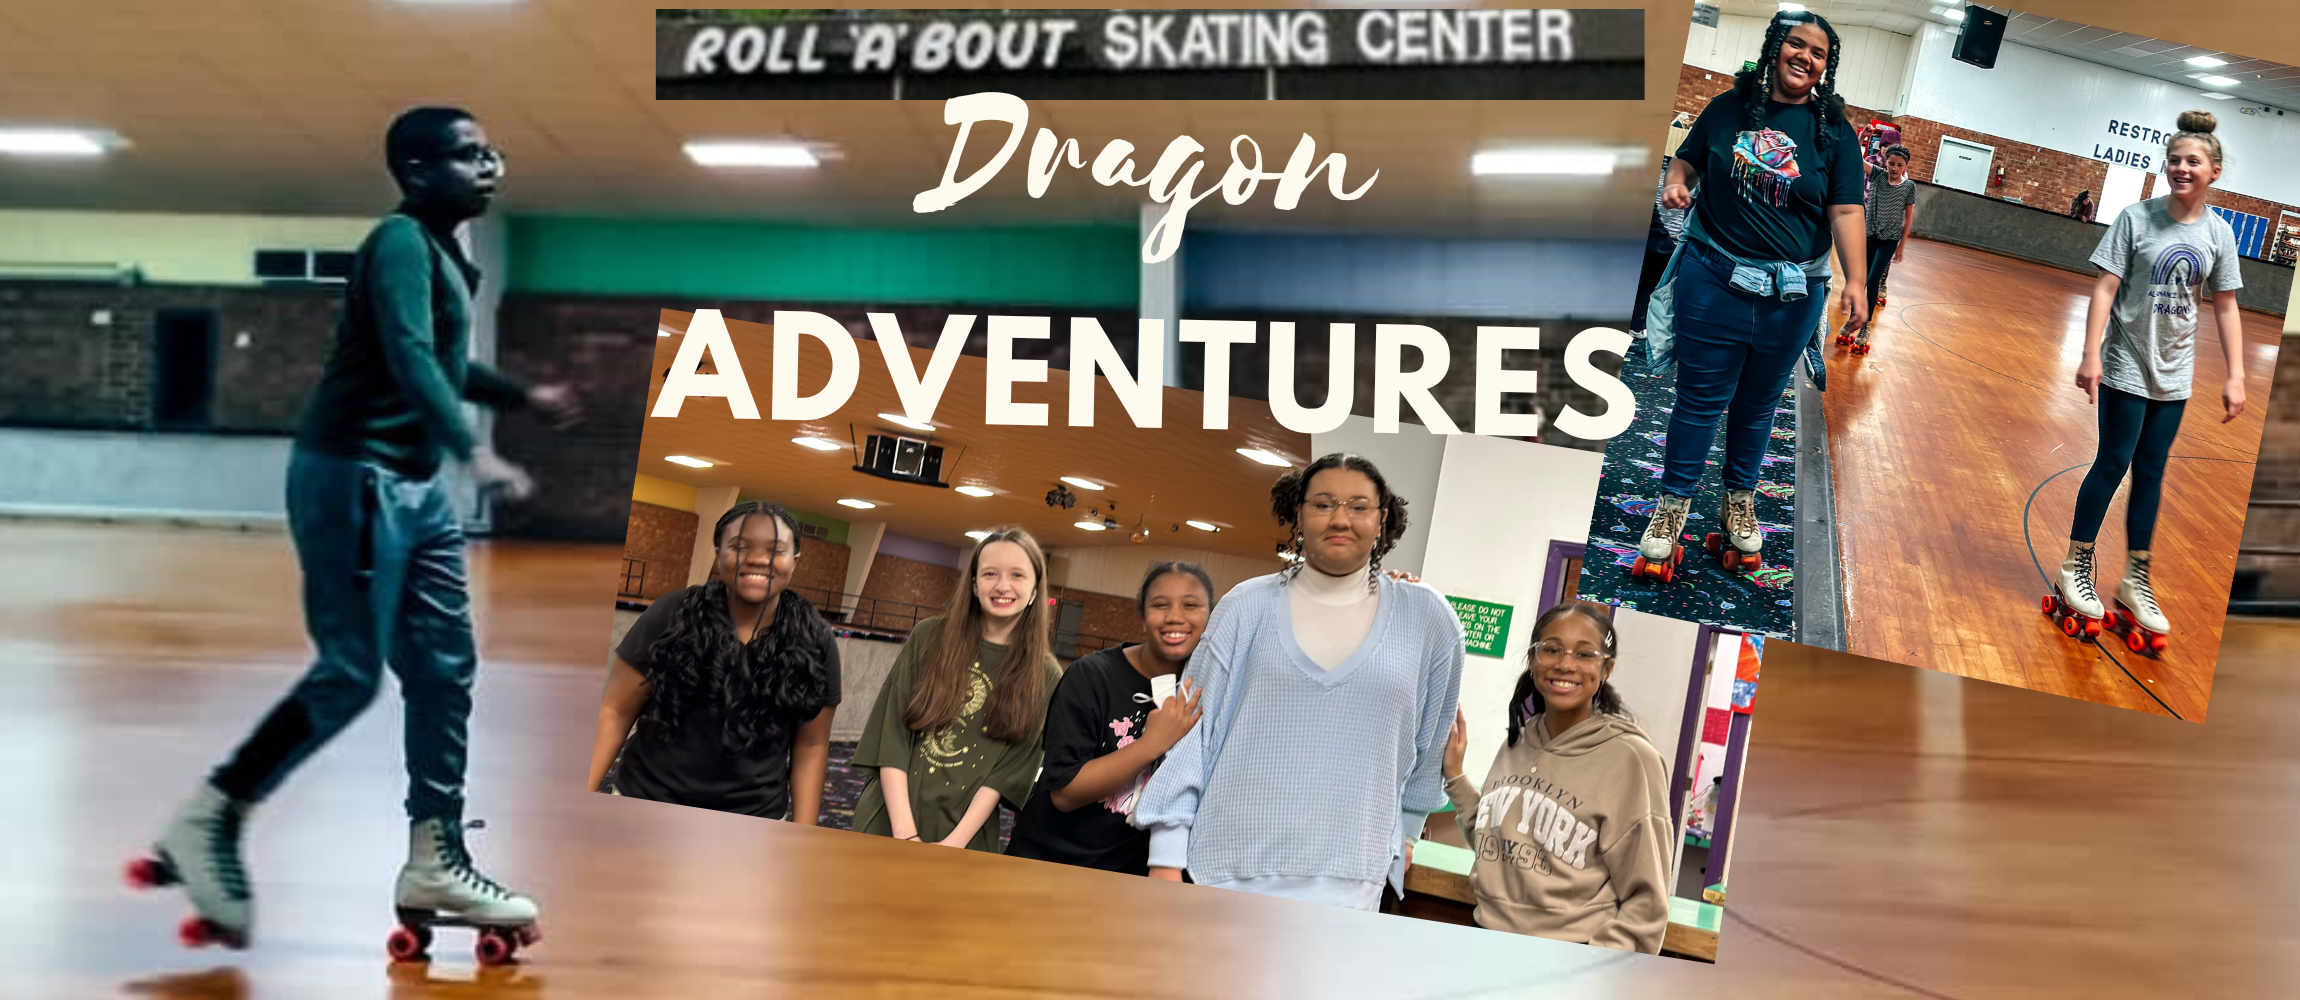 A photo montage of students roller skating and posing at Roll A Bout for a Dragon Adventure